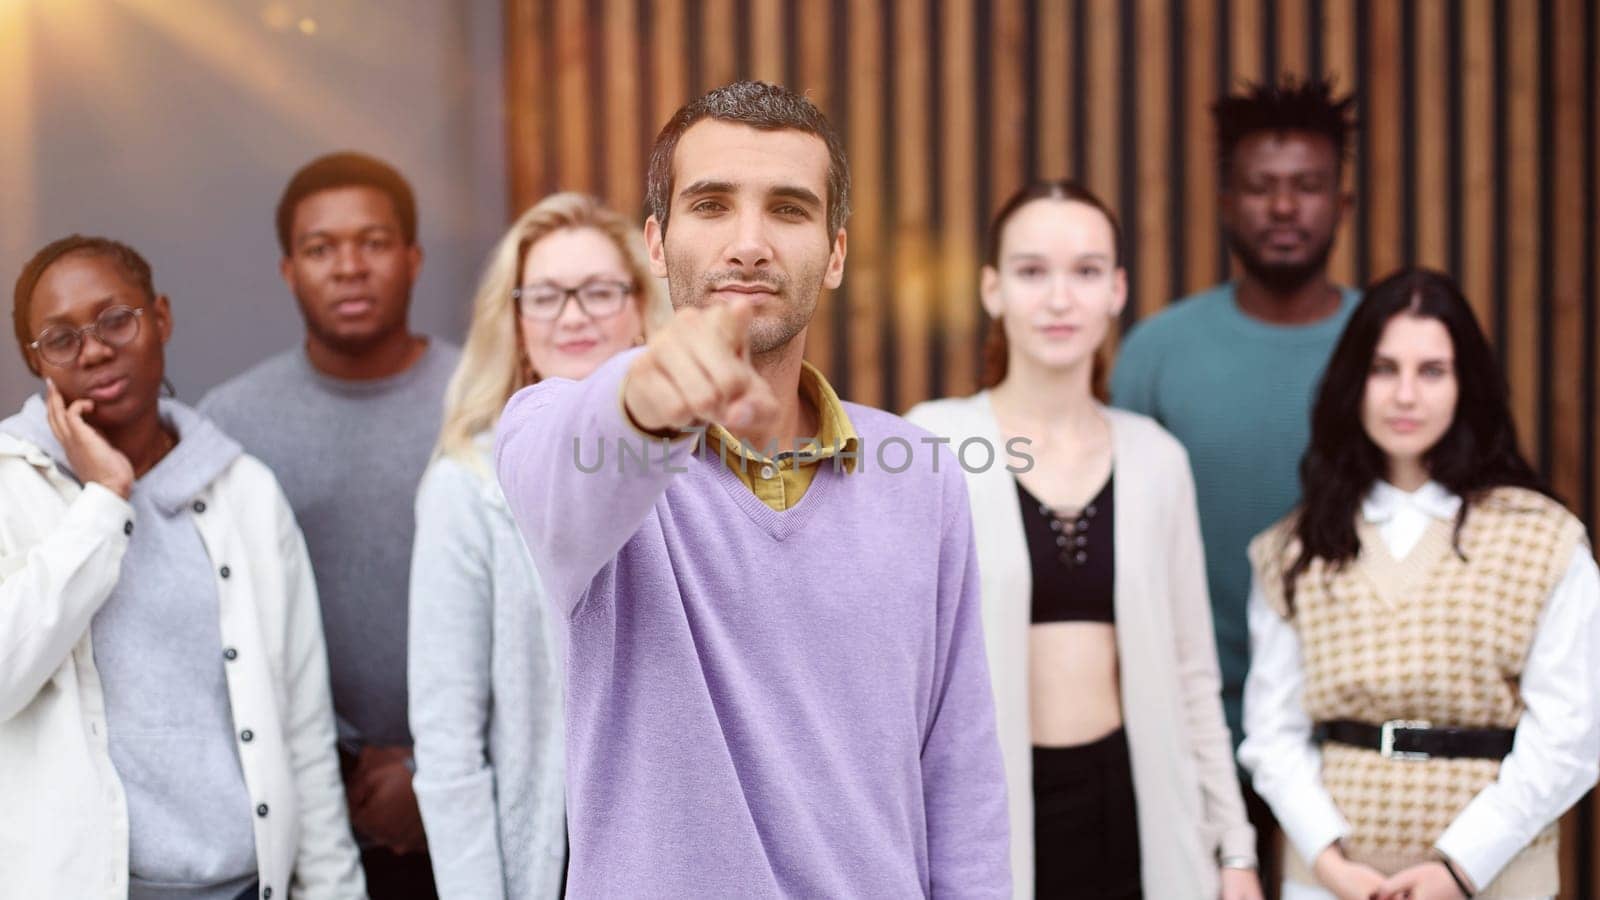 a man points at you against the background of colleagues in a modern office